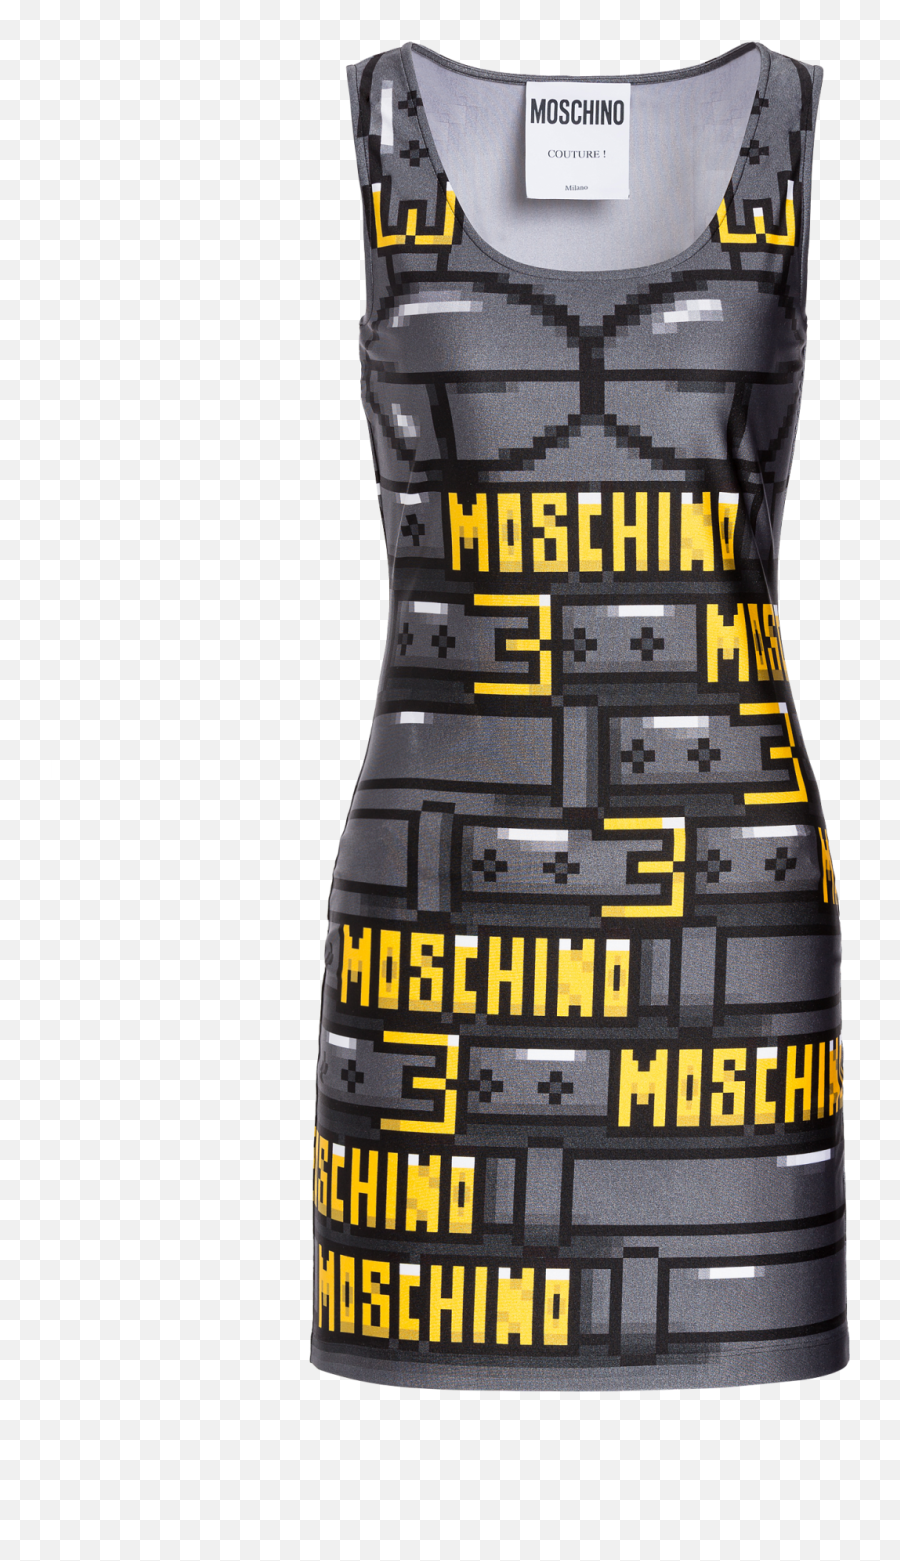 Moschino Reveals Capsule Collection With The Sims The Emoji,Outfits Inspired By Emojis